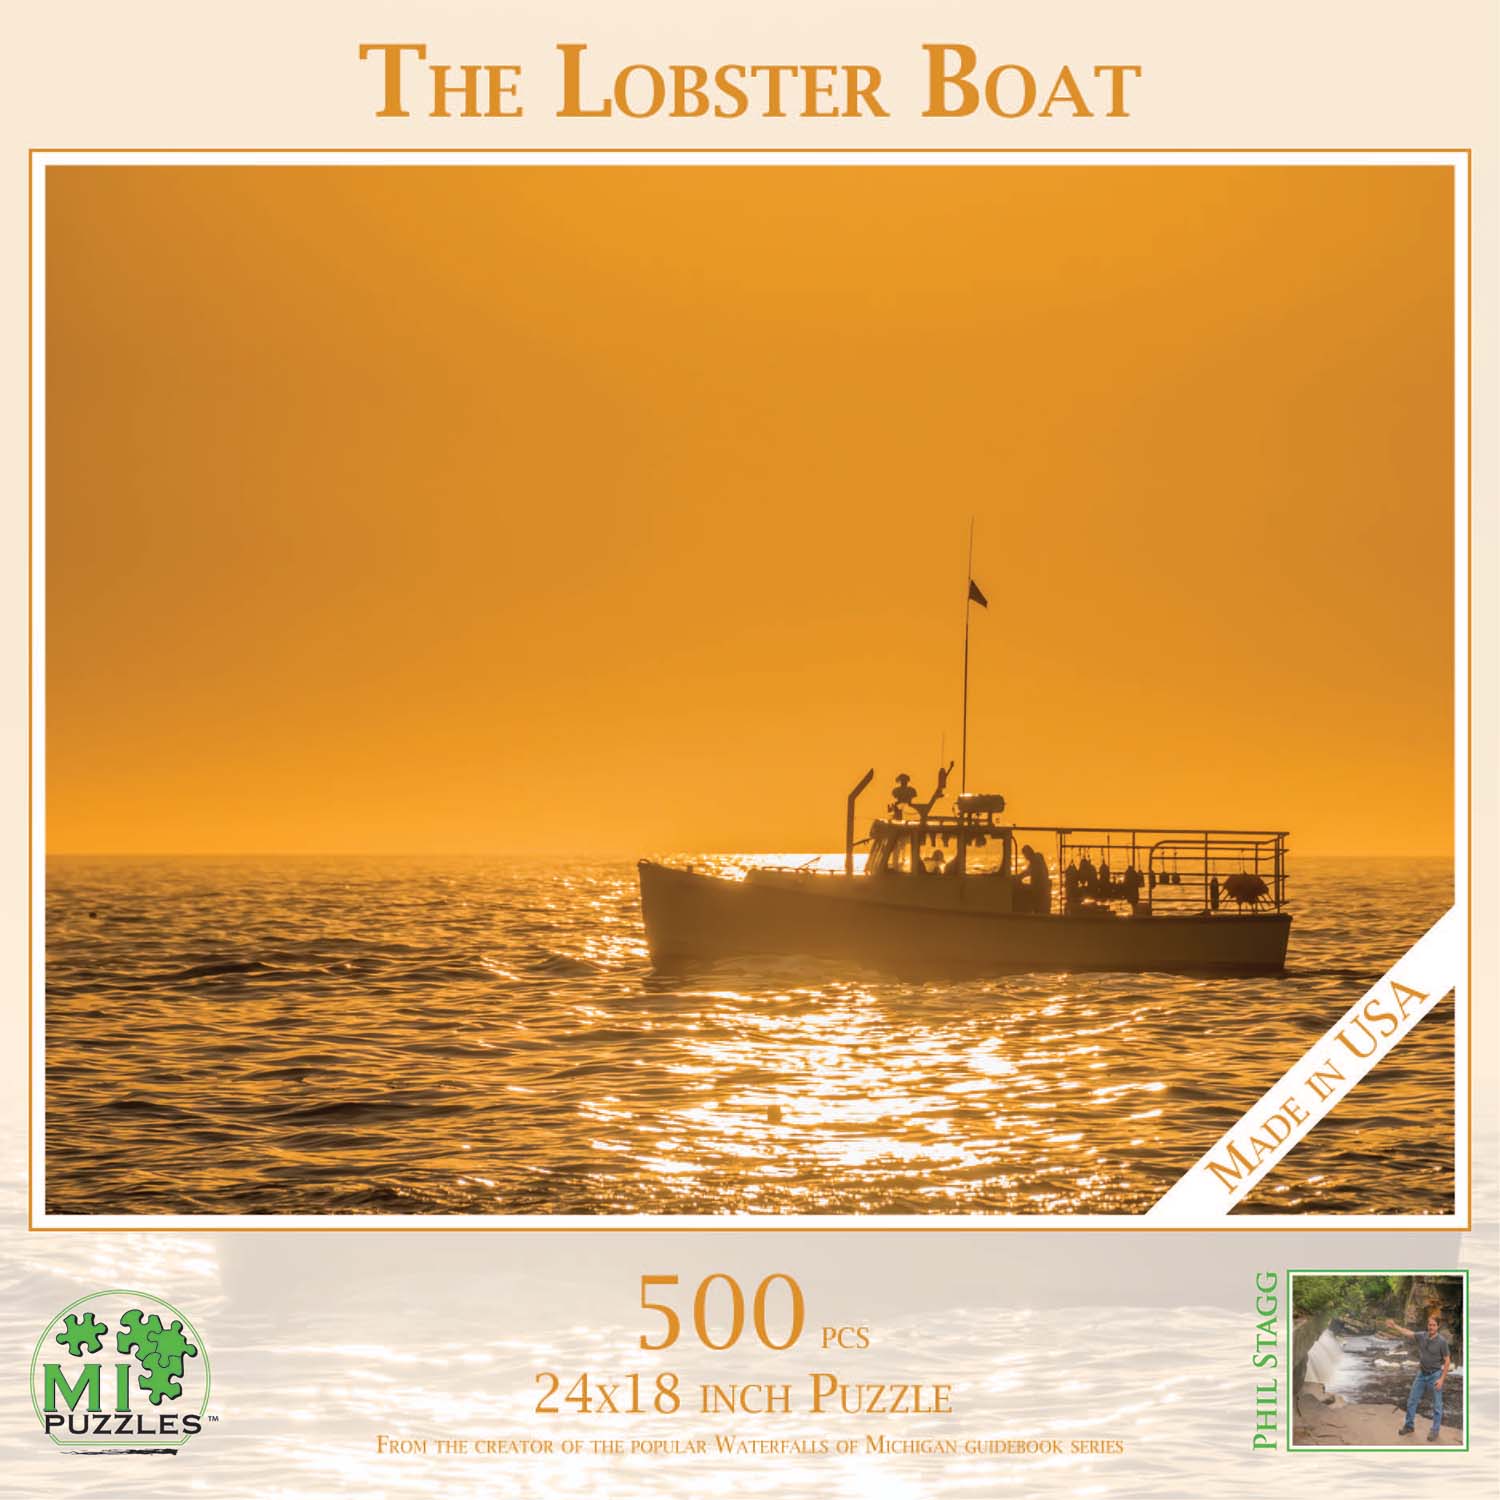 The Lobster Boat - Scratch and Dent Jigsaw Puzzle